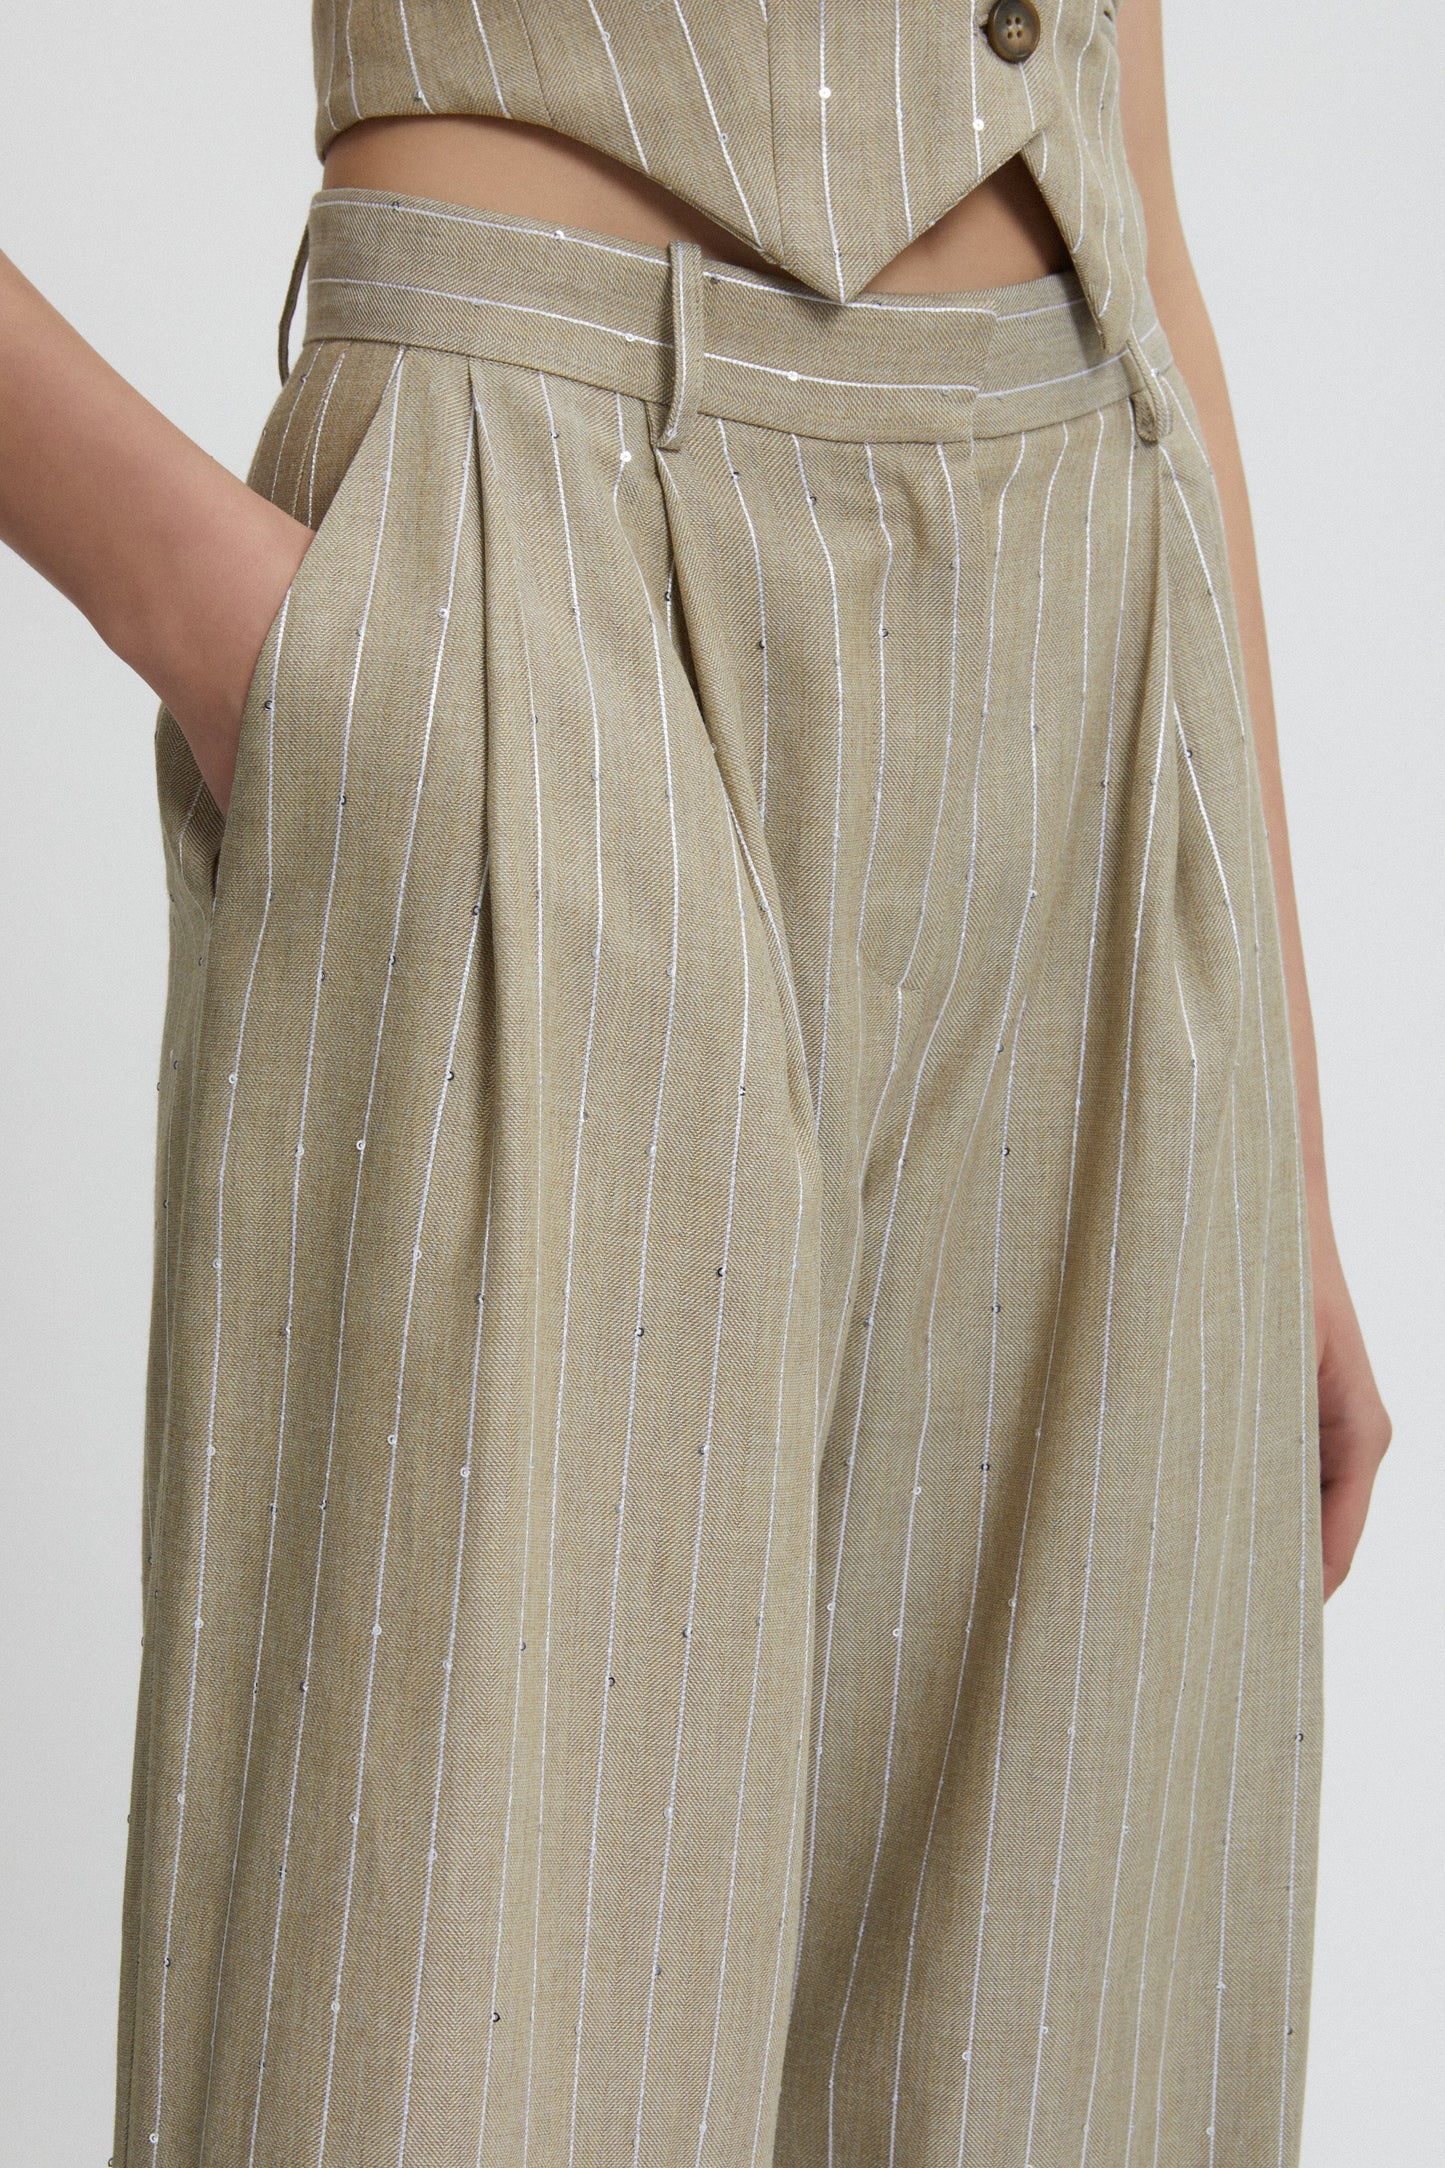 PINSTRIPE PANTS WITH SEQUINS